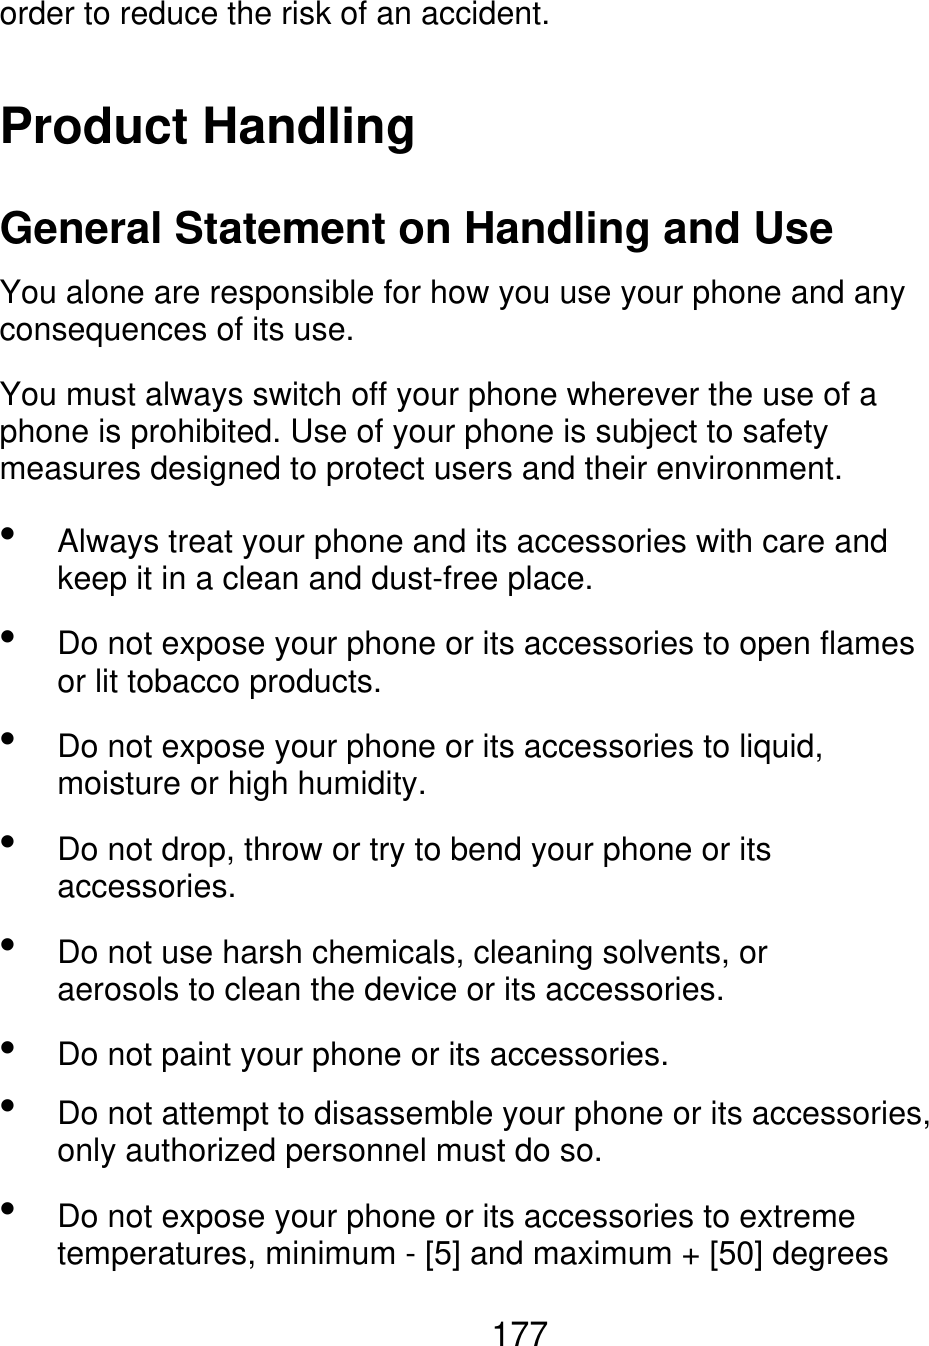 order to reduce the risk of an accident. Product Handling General Statement on Handling and Use You alone are responsible for how you use your phone and any consequences of its use. You must always switch off your phone wherever the use of a phone is prohibited. Use of your phone is subject to safety measures designed to protect users and their environment.         Always treat your phone and its accessories with care and keep it in a clean and dust-free place. Do not expose your phone or its accessories to open flames or lit tobacco products. Do not expose your phone or its accessories to liquid, moisture or high humidity. Do not drop, throw or try to bend your phone or its accessories. Do not use harsh chemicals, cleaning solvents, or aerosols to clean the device or its accessories. Do not paint your phone or its accessories. Do not attempt to disassemble your phone or its accessories, only authorized personnel must do so. Do not expose your phone or its accessories to extreme temperatures, minimum - [5] and maximum + [50] degrees 177 